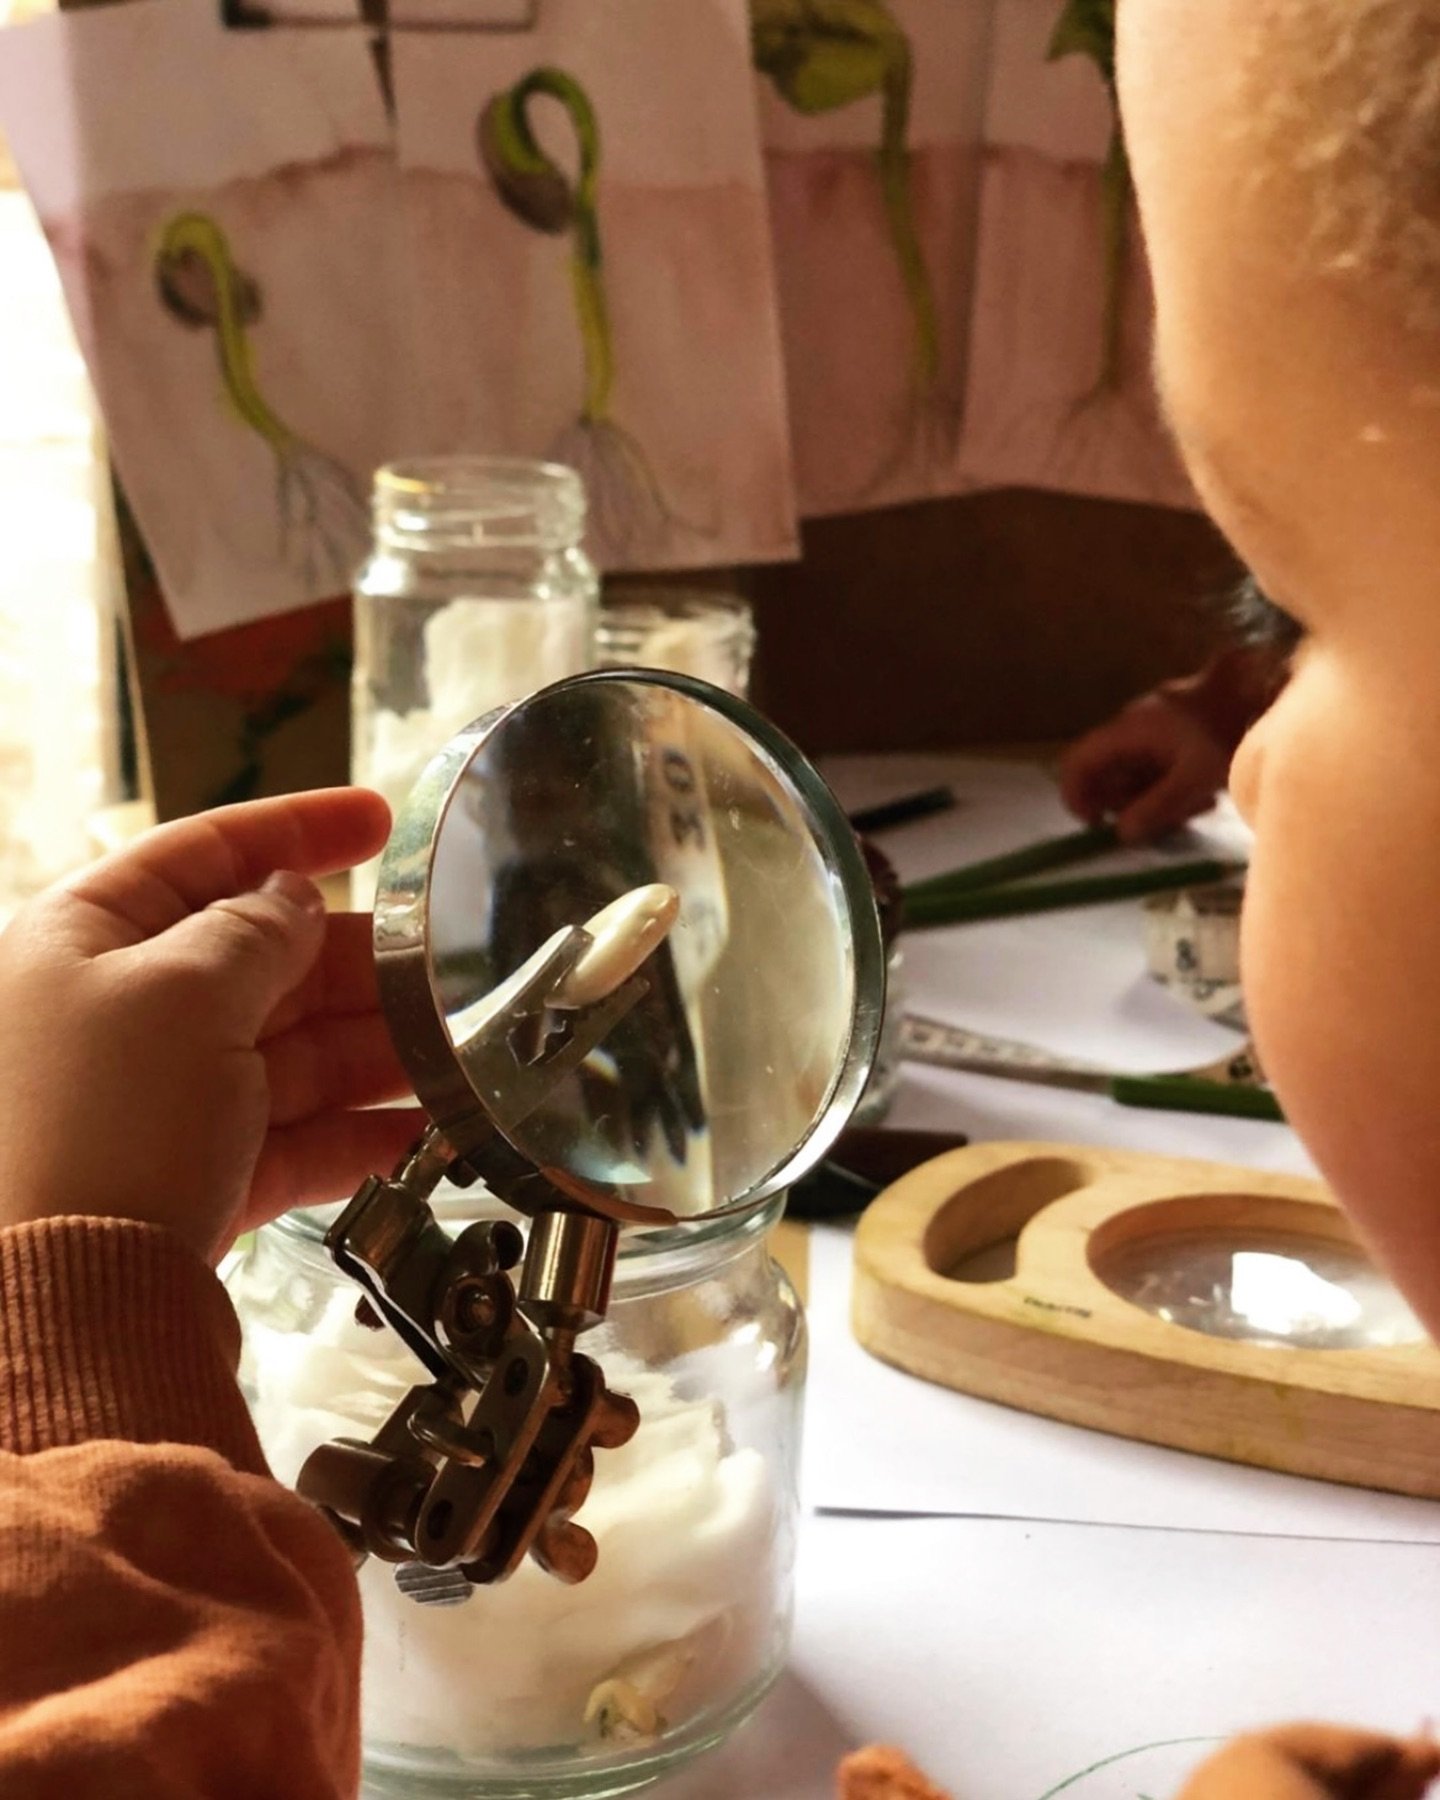 Investigating seeds in the Lodge at Naturally Learning Blackwater 🔎

#thisisnaturallylearning